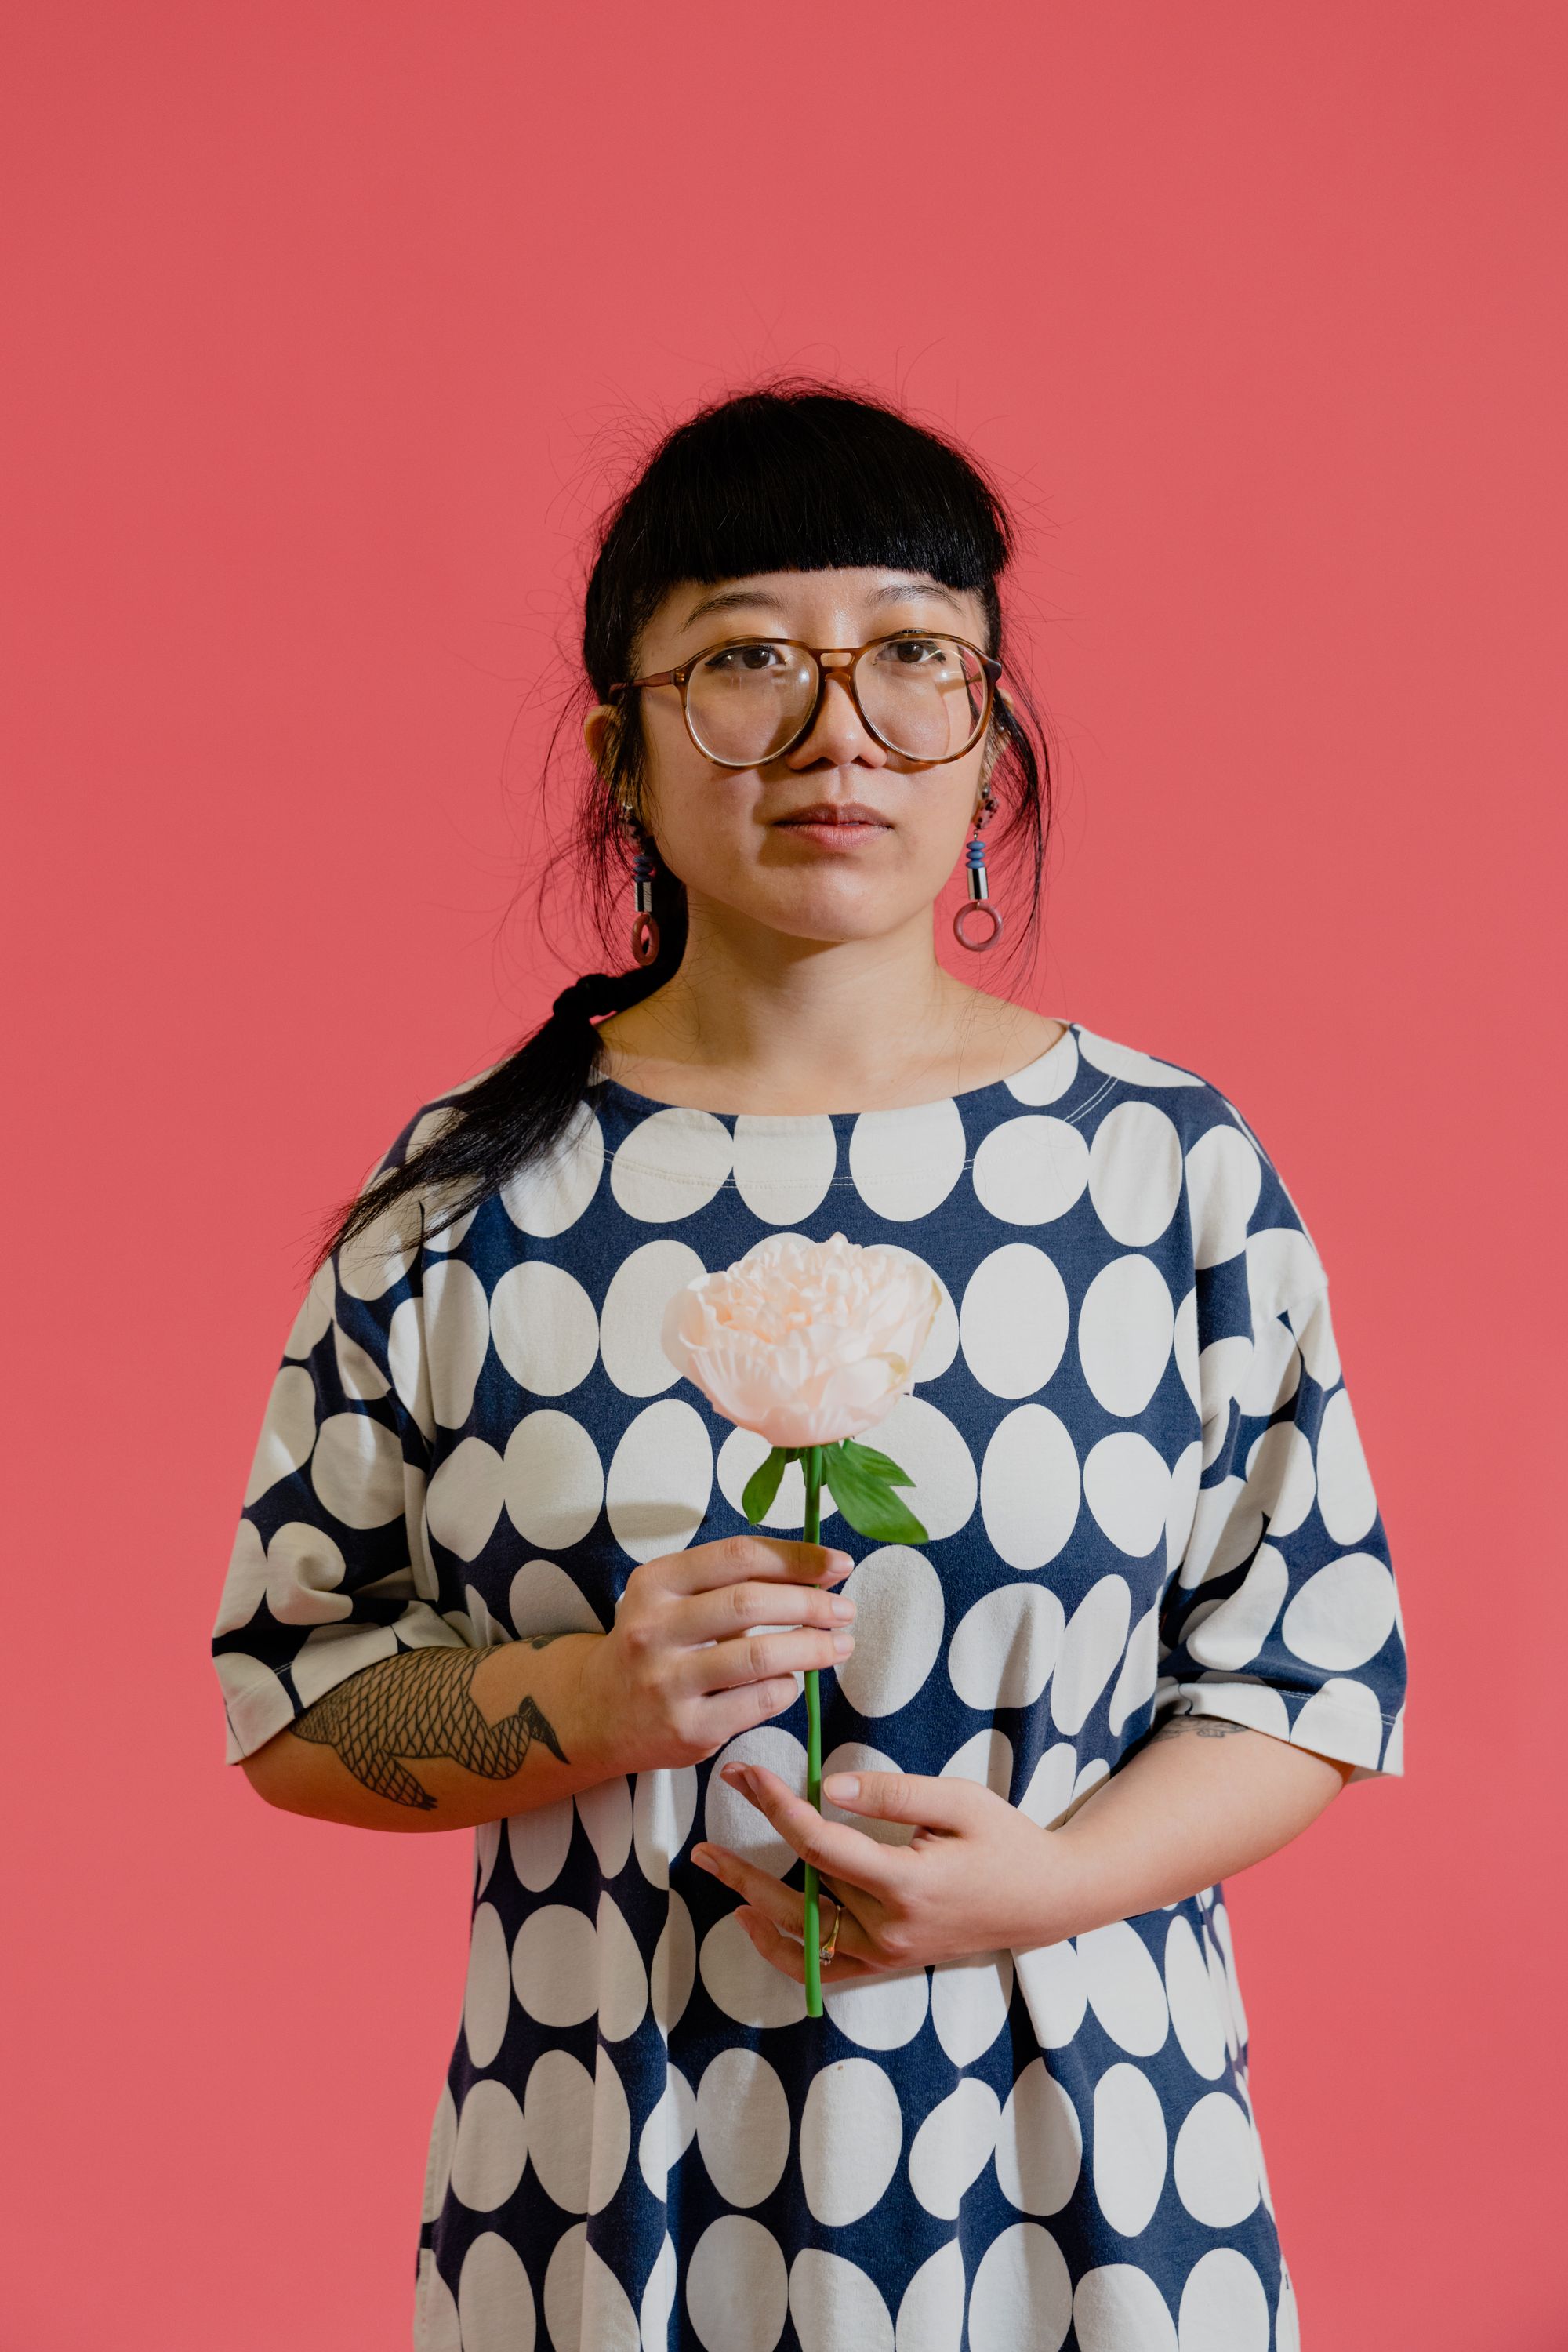 Photographic portrait of painter and illustrator Kristen Liu-Wong standing against a pink backdrop holding a peony stem.